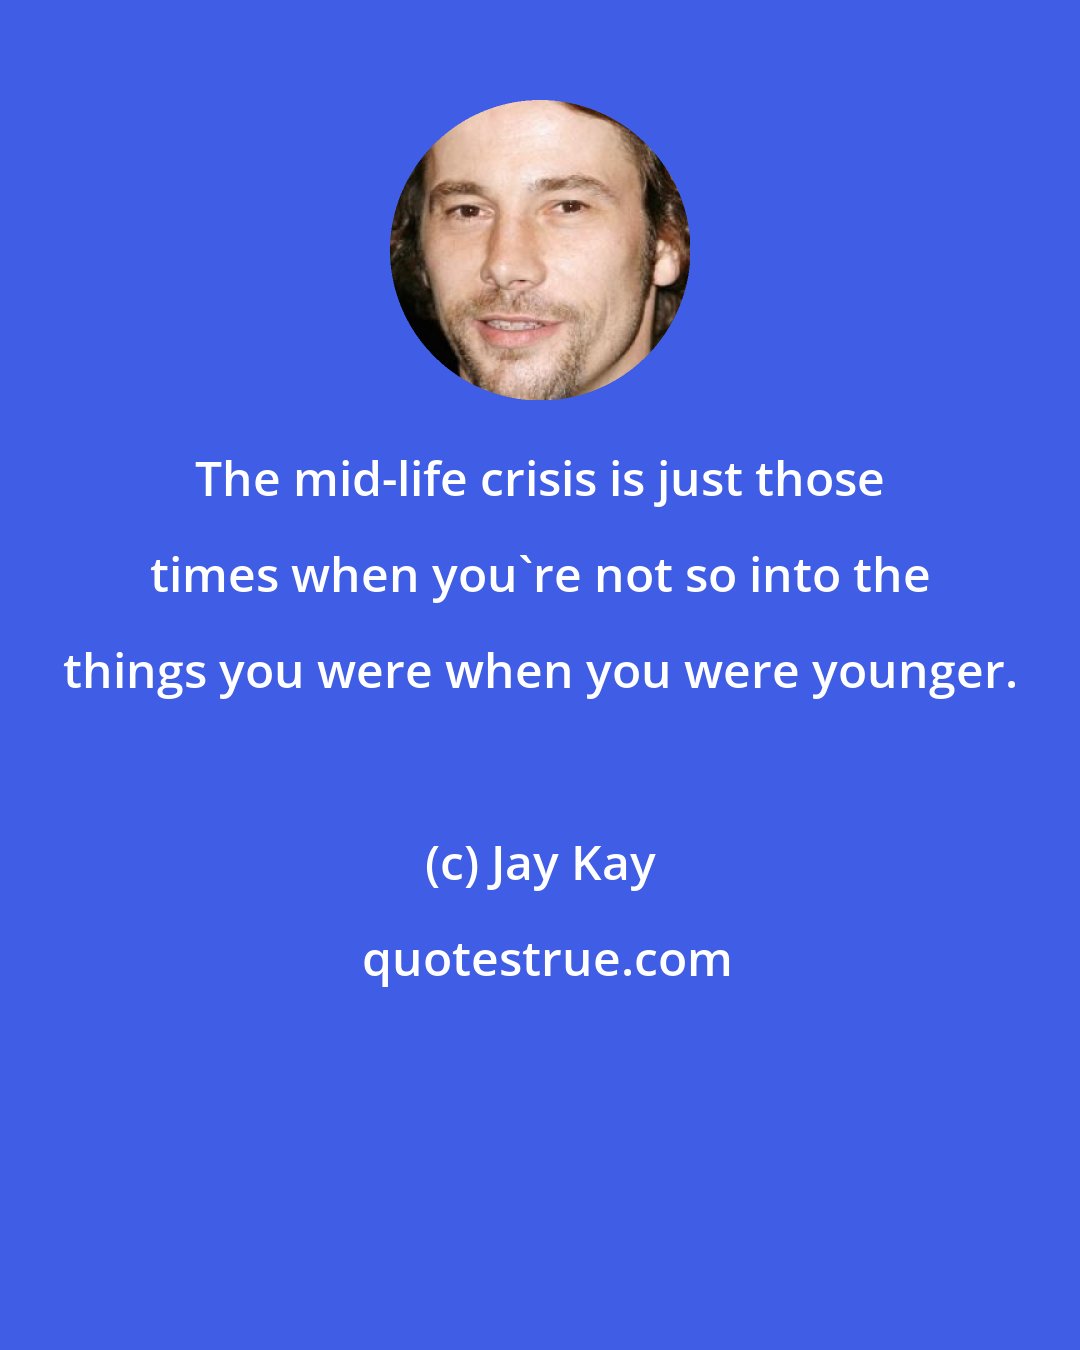 Jay Kay: The mid-life crisis is just those times when you're not so into the things you were when you were younger.